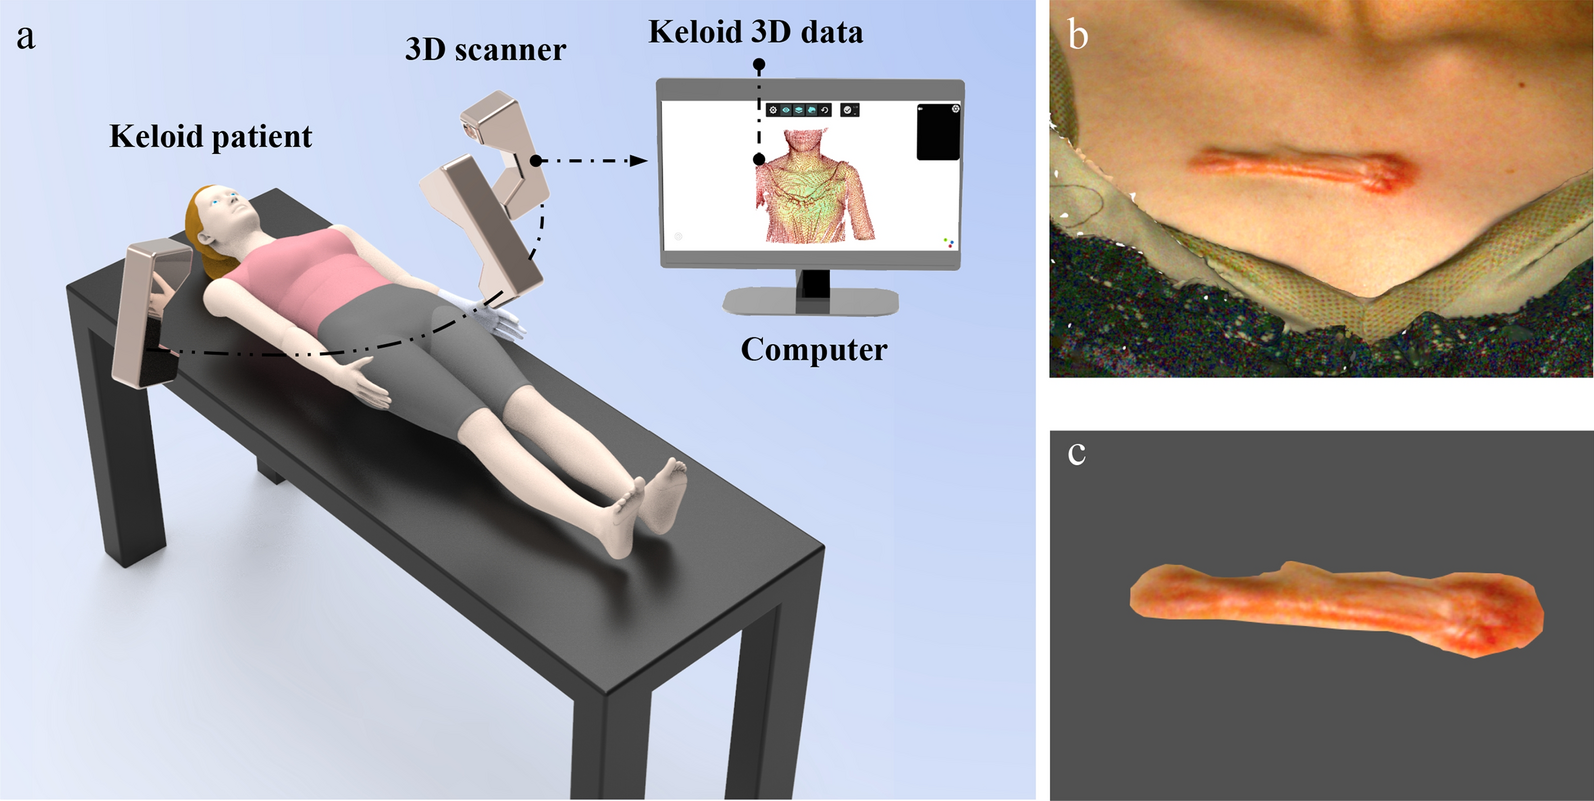 Application of high-precision 3D scanner in keloids evaluation to improve patients’ compliance: a questionnaire-based study